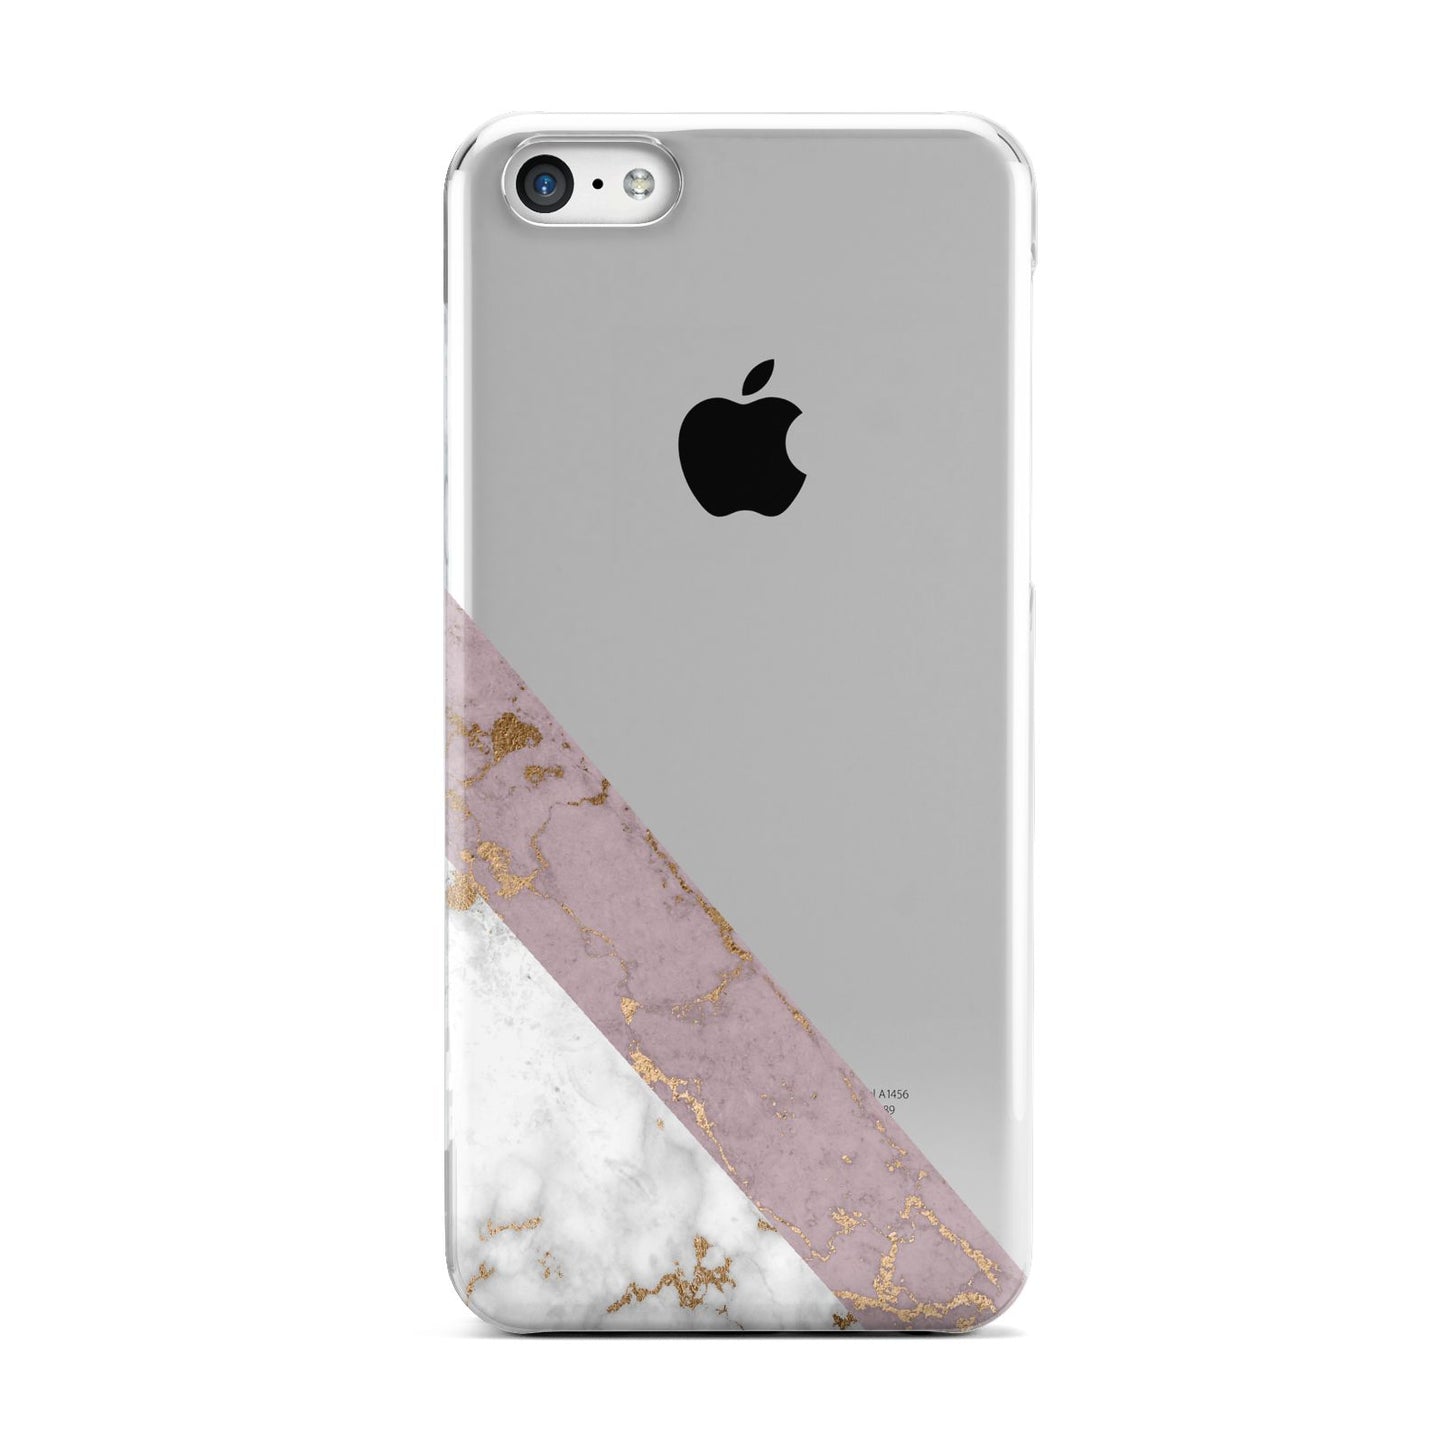 Transparent Pink and White Marble Apple iPhone 5c Case